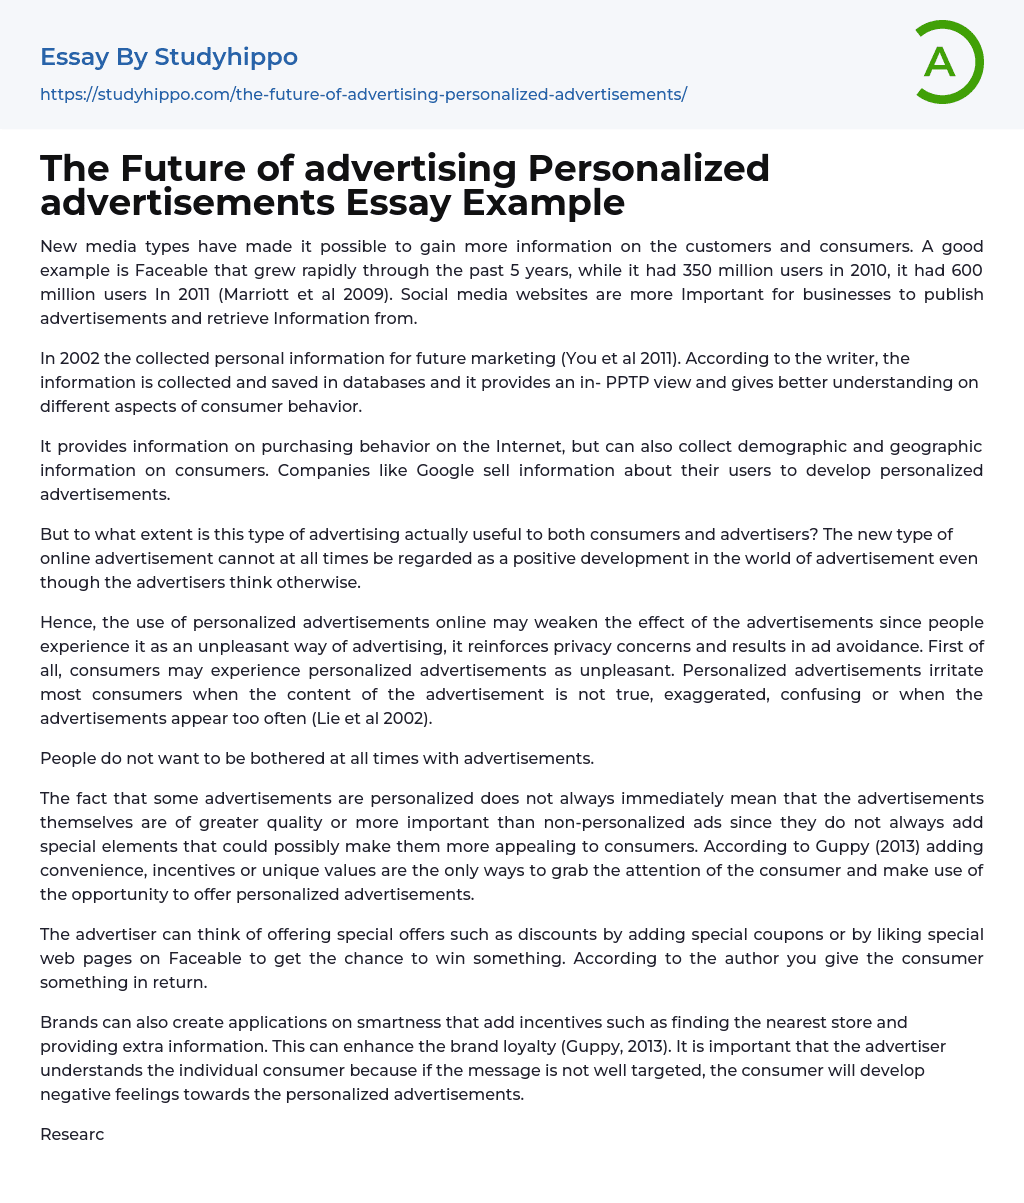 The Future of advertising Personalized advertisements Essay Example